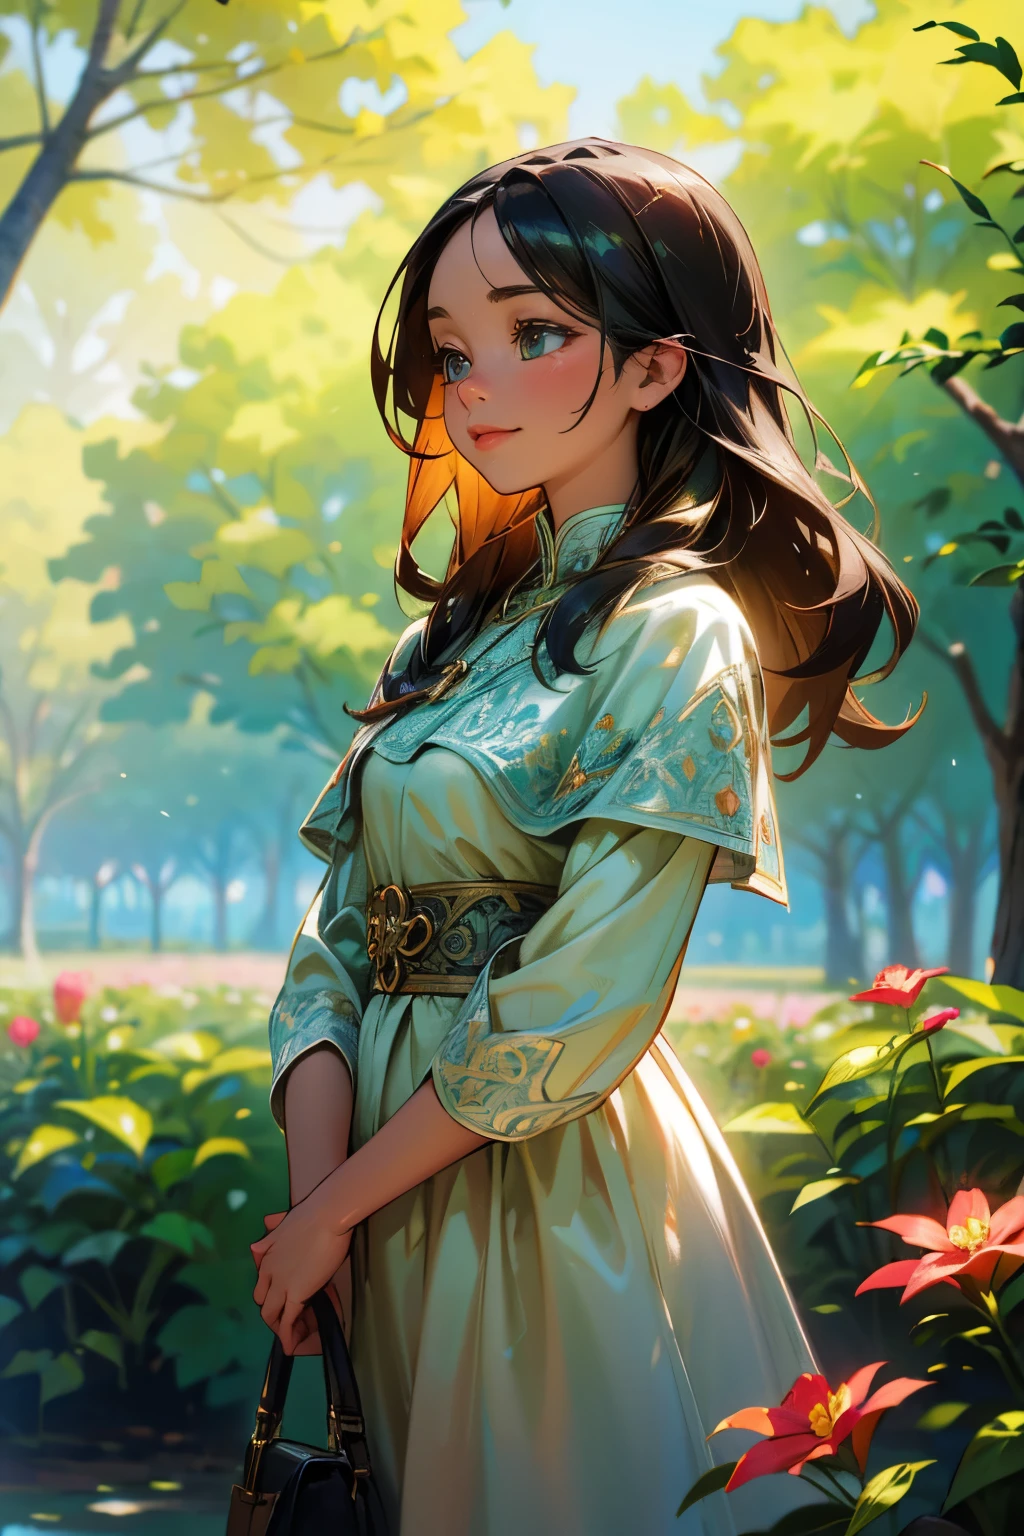 A girl with beautiful detailed eyes and lips, surrounded by vibrant flowers and trees in a garden. The girl is wearing a flowing dress with intricate floral patterns. She is standing with a confident and graceful posture, her face radiating joy and happiness. The sunlight filters through the leaves, creating a soft and enchanting atmosphere. The artwork is created with the medium of oil painting, showcasing rich textures and brushstrokes. The image quality is of the best quality, with ultra-detailed features and a realistic, photorealistic rendering. The colors are vivid and vibrant, capturing the essence of the garden scene. The lighting is soft and warm, emphasizing the girl's beauty and illuminating the garden with a magical glow.